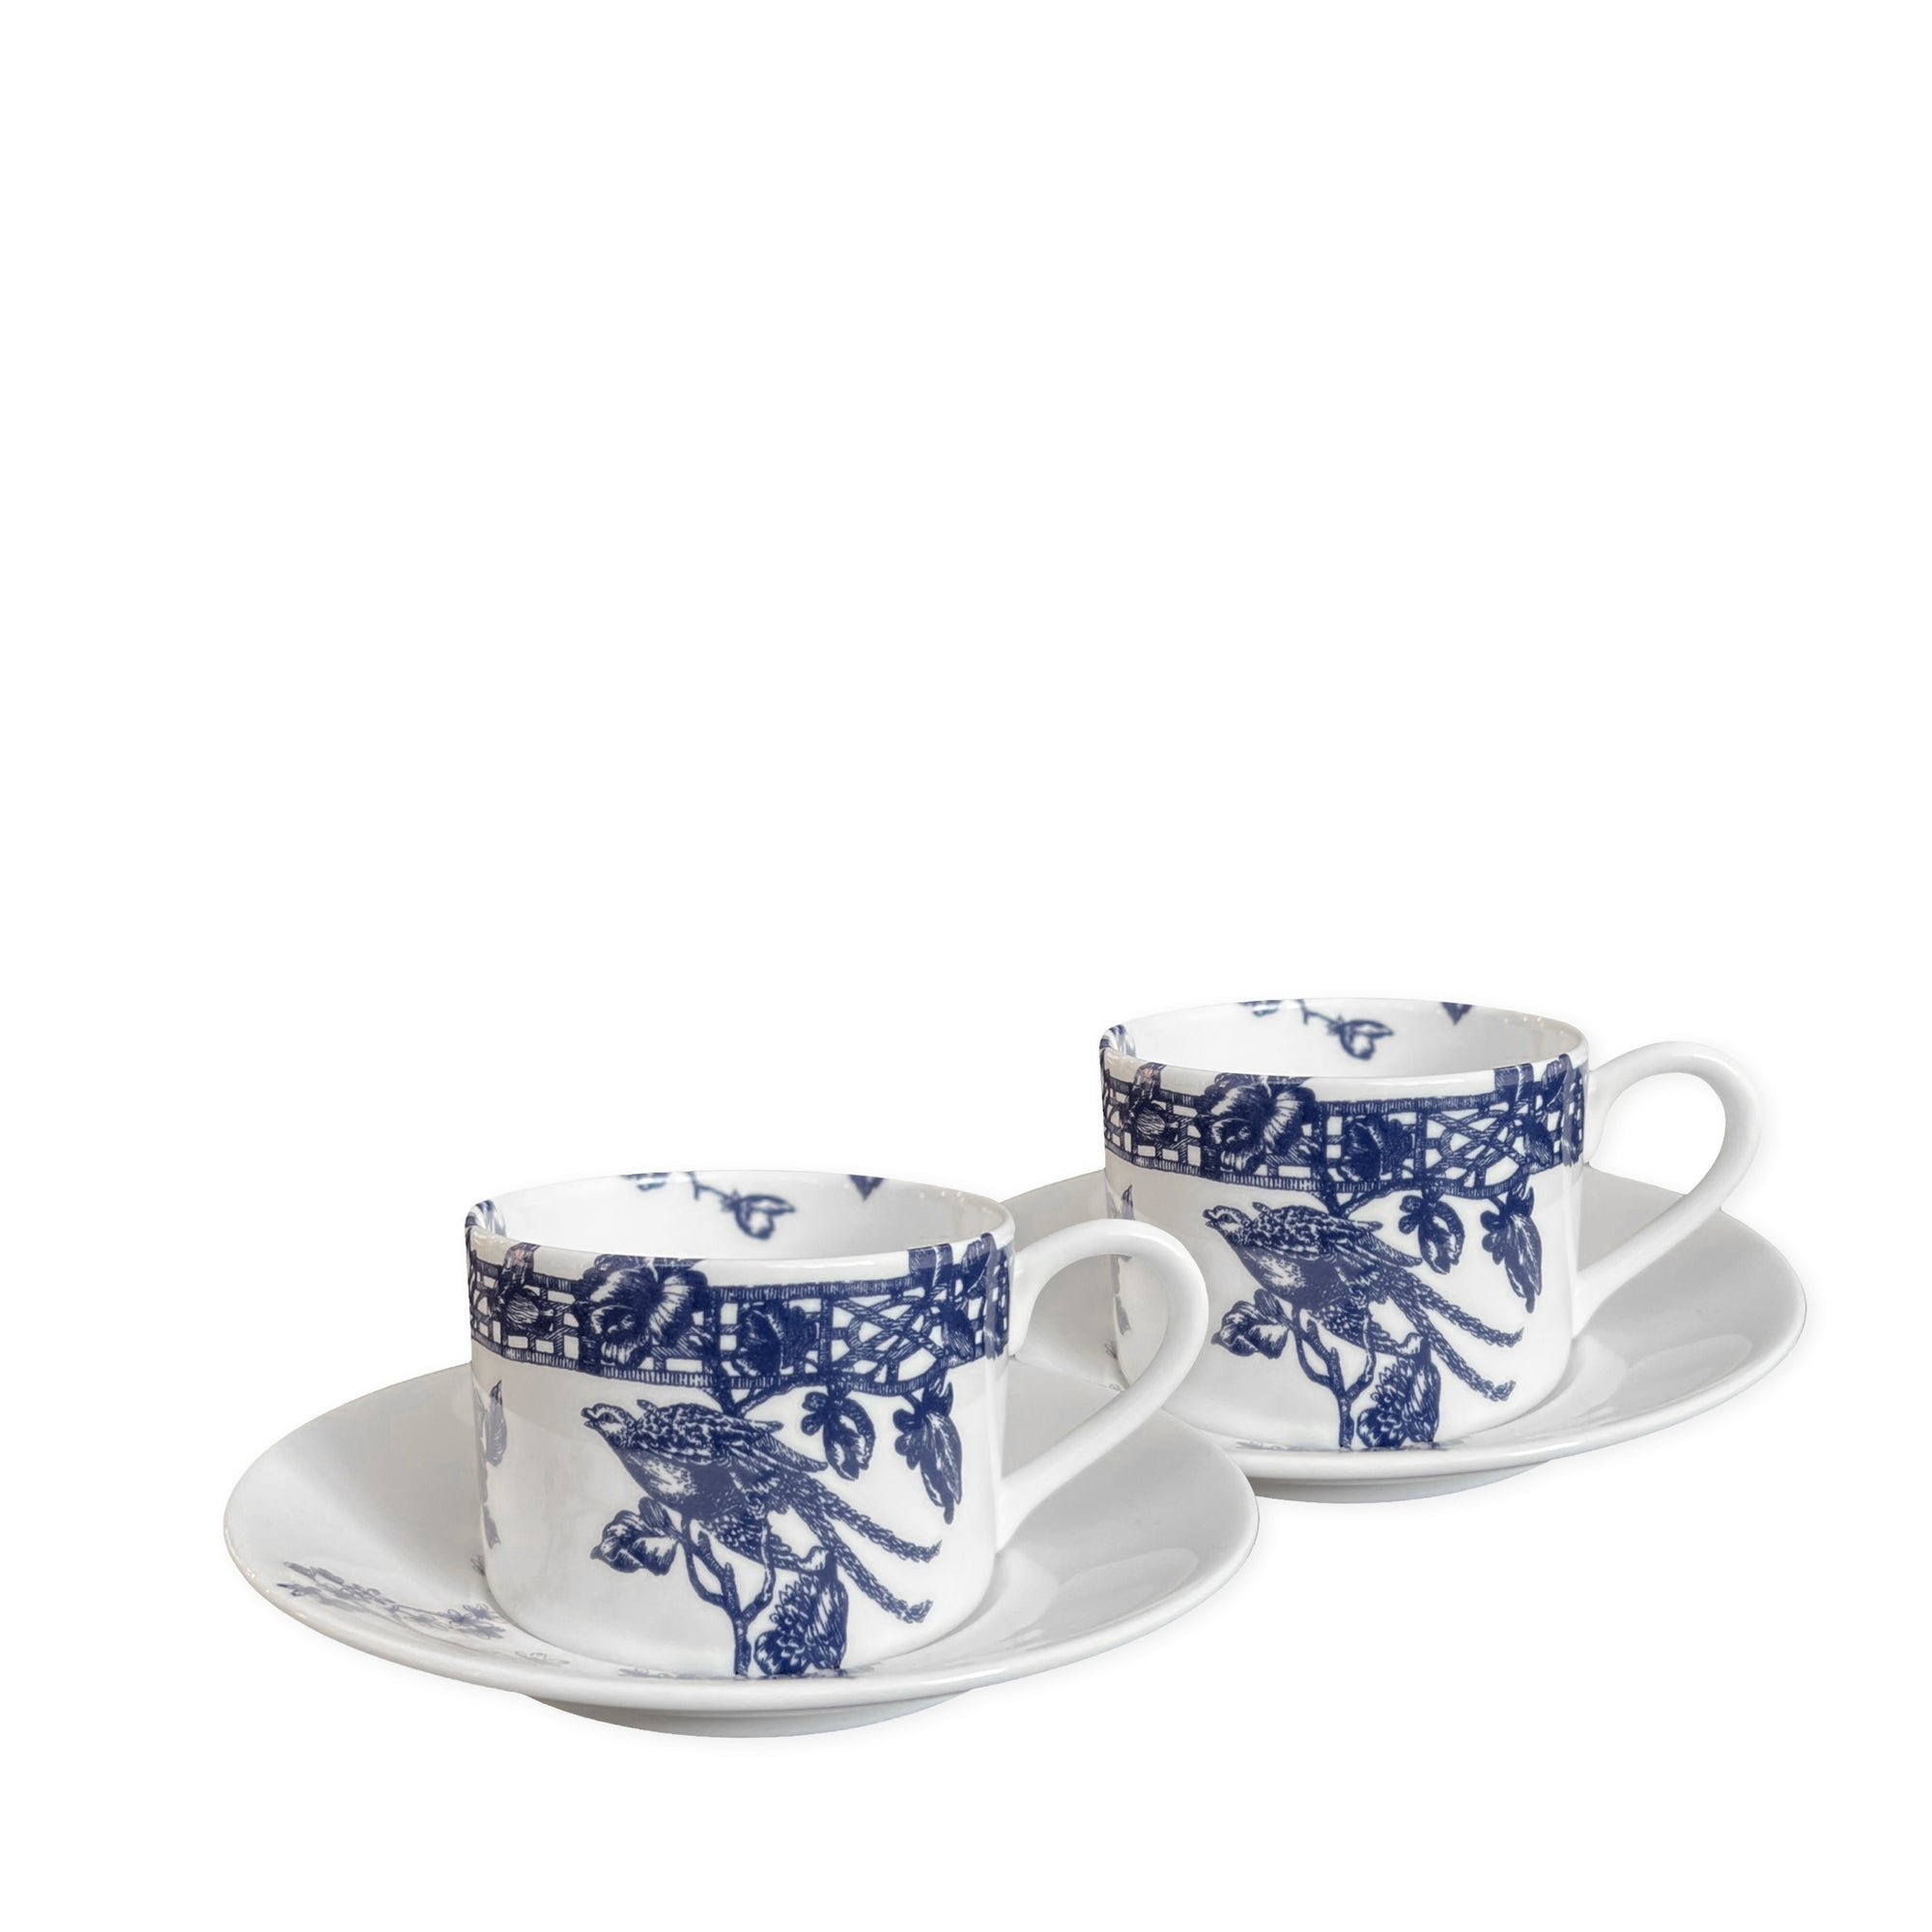 Two white ceramic teacups with blue floral patterns, reminiscent of Chinoiserie Toile, rest on matching saucers. The intricate designs evoke a sense of antique textiles as they sit side by side against a plain background. These are the Chinoiserie Toile Cups & Saucers, Set of 2 by Caskata Artisanal Home.